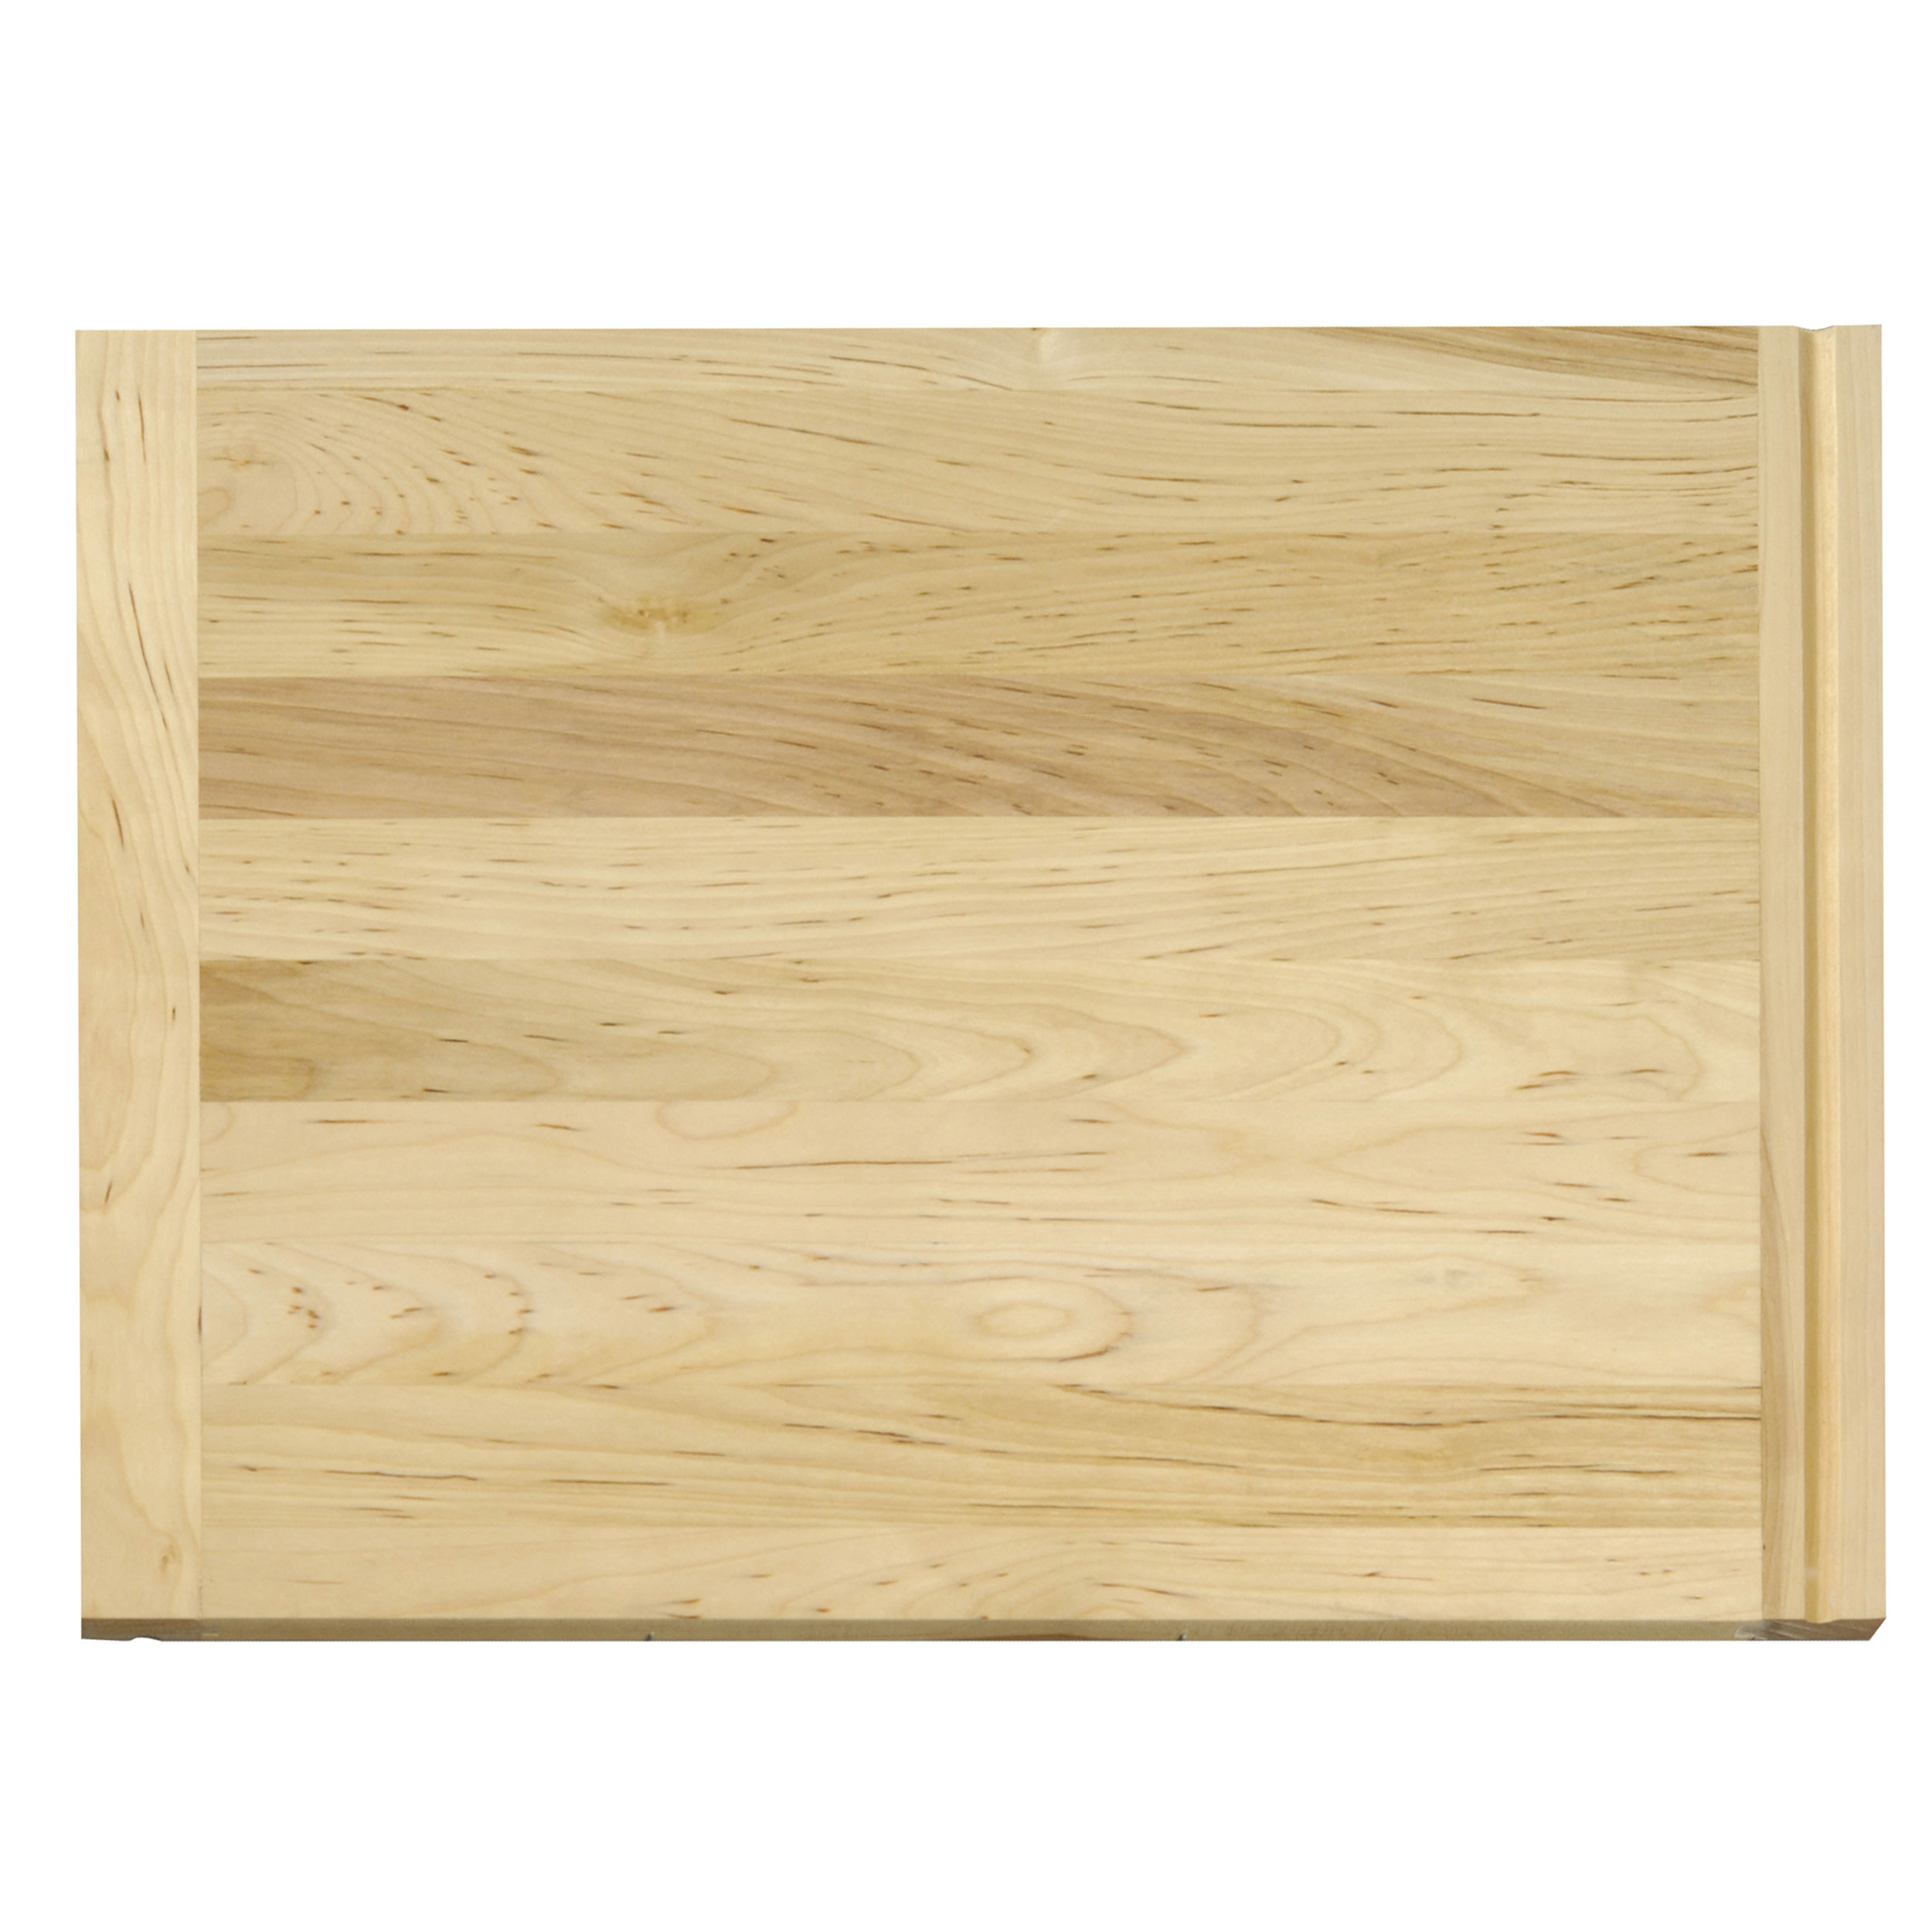 16 X 22 Inch X 3/4 Inch Thick Hardwood Cutting Board With Routed Pull-out